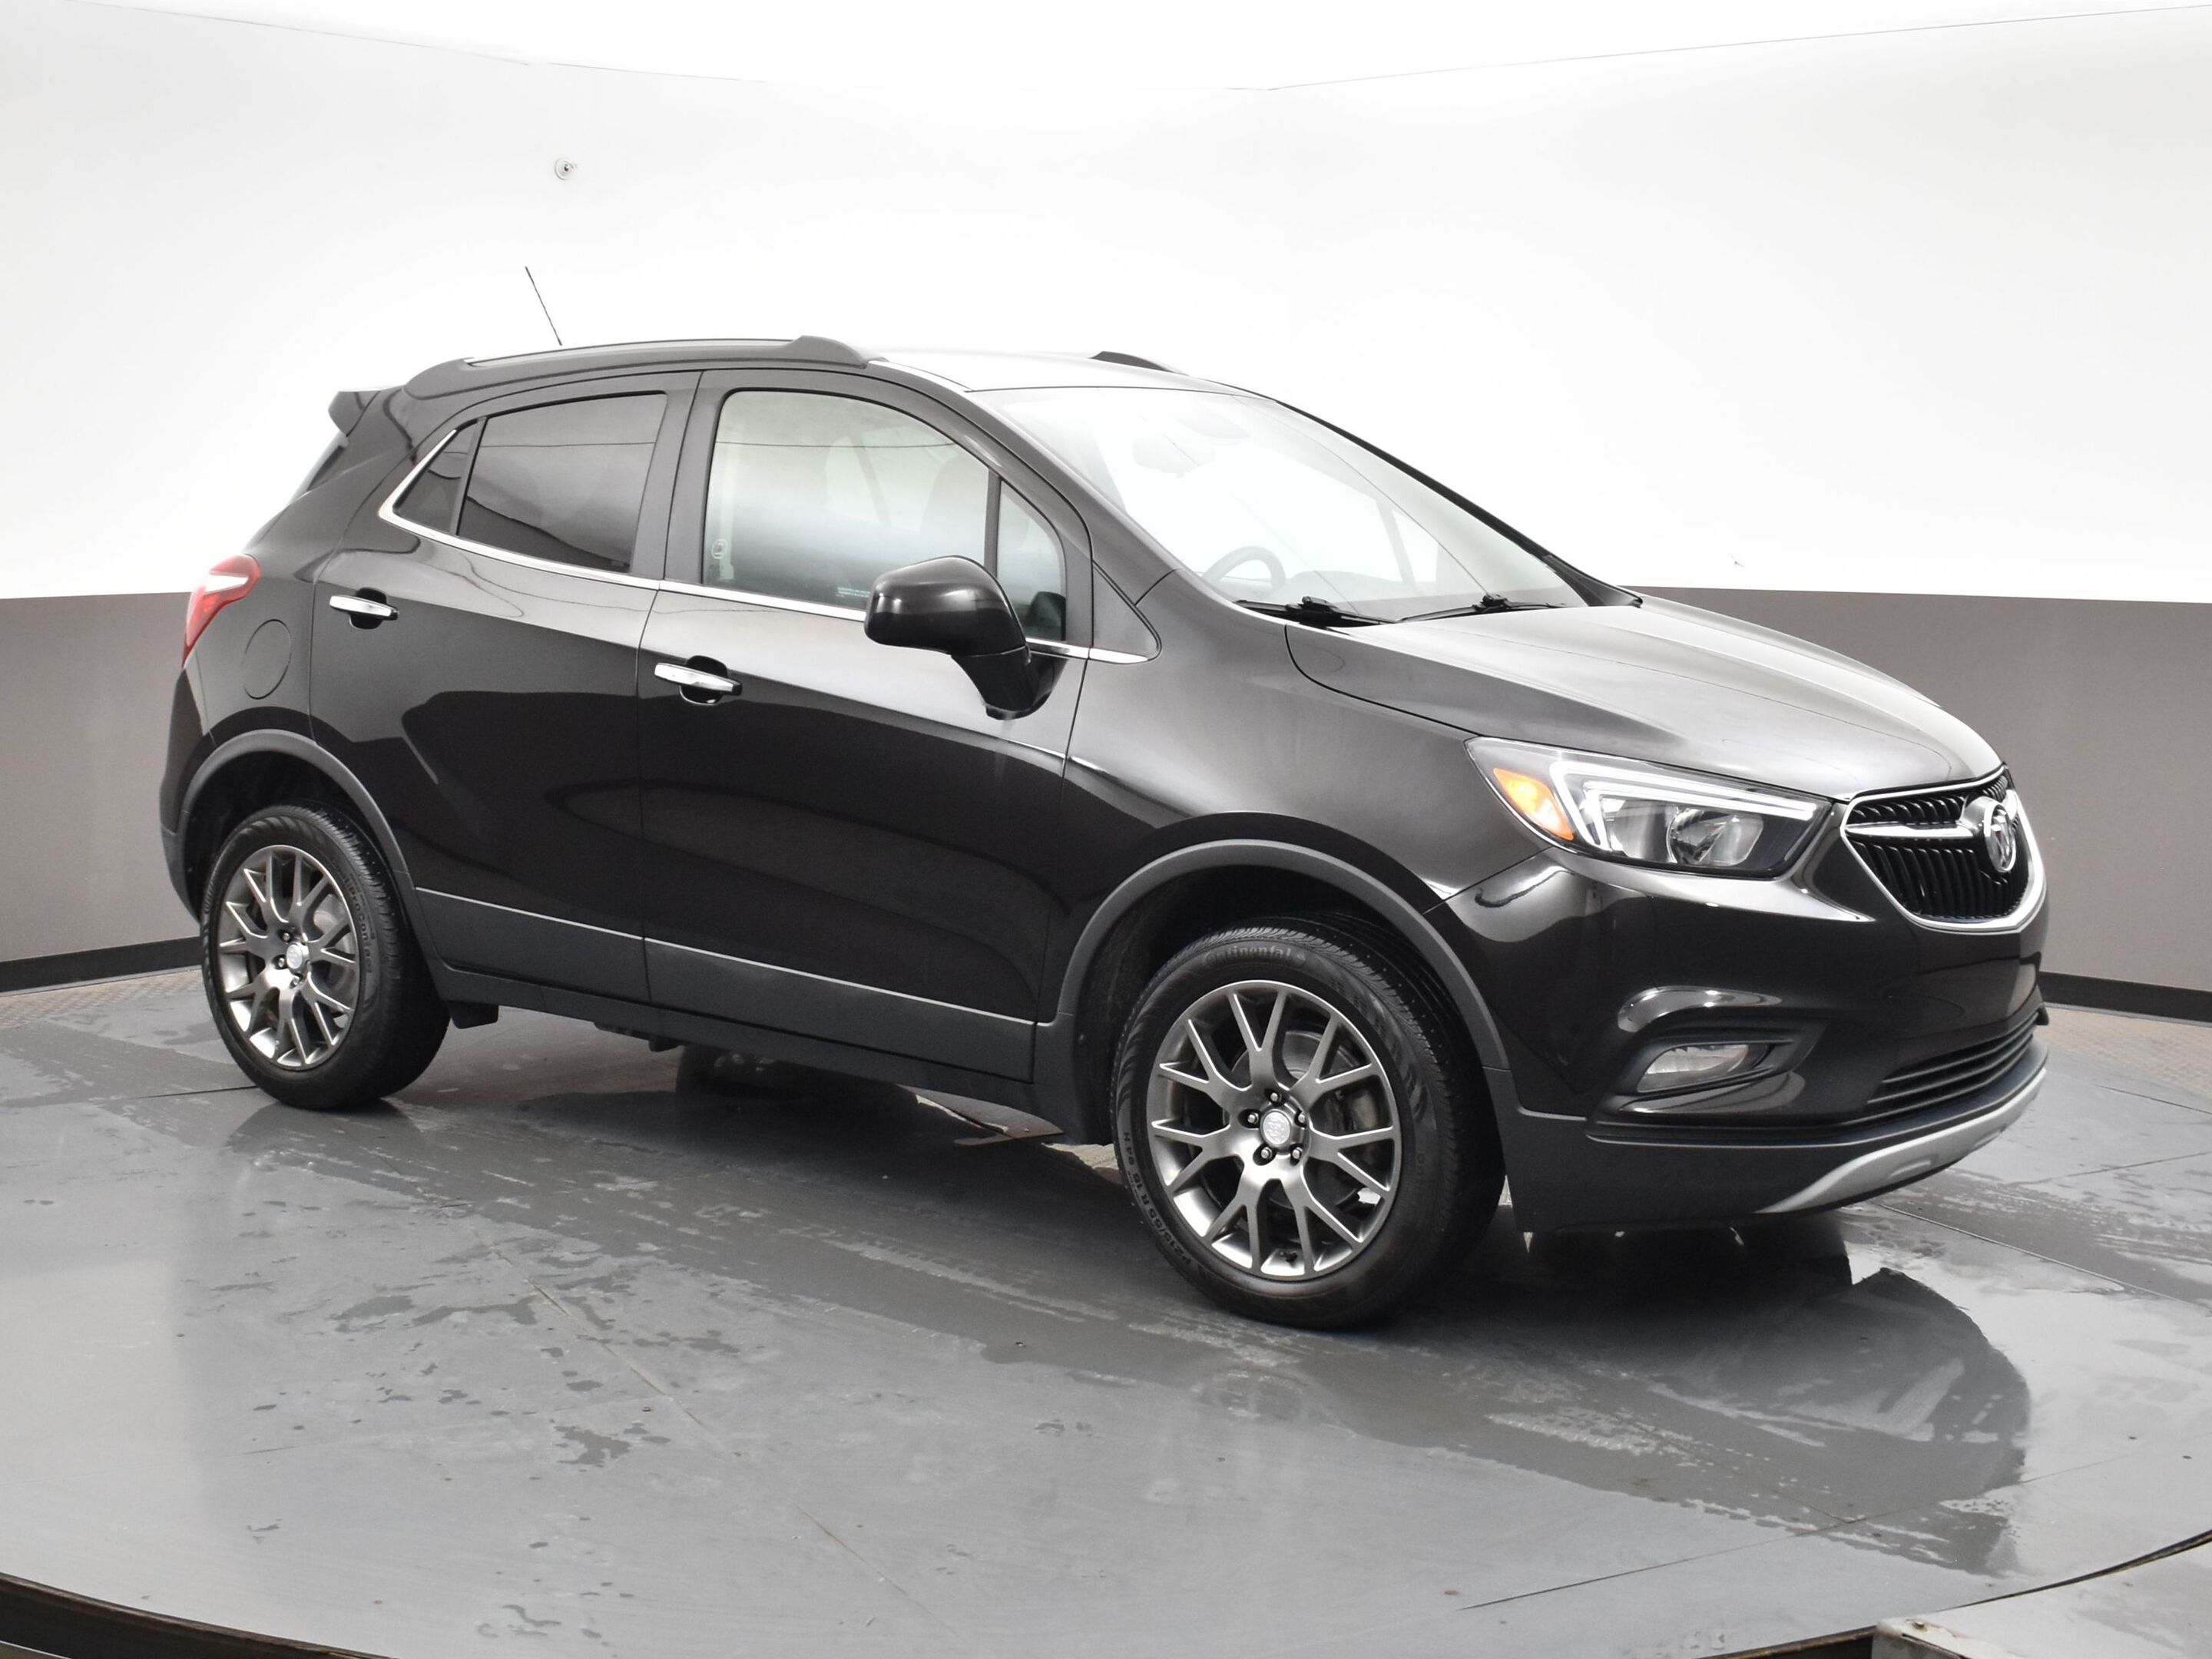 2020 Buick Encore SPORT TOURING Great Price - Low Kms with Backup Ca